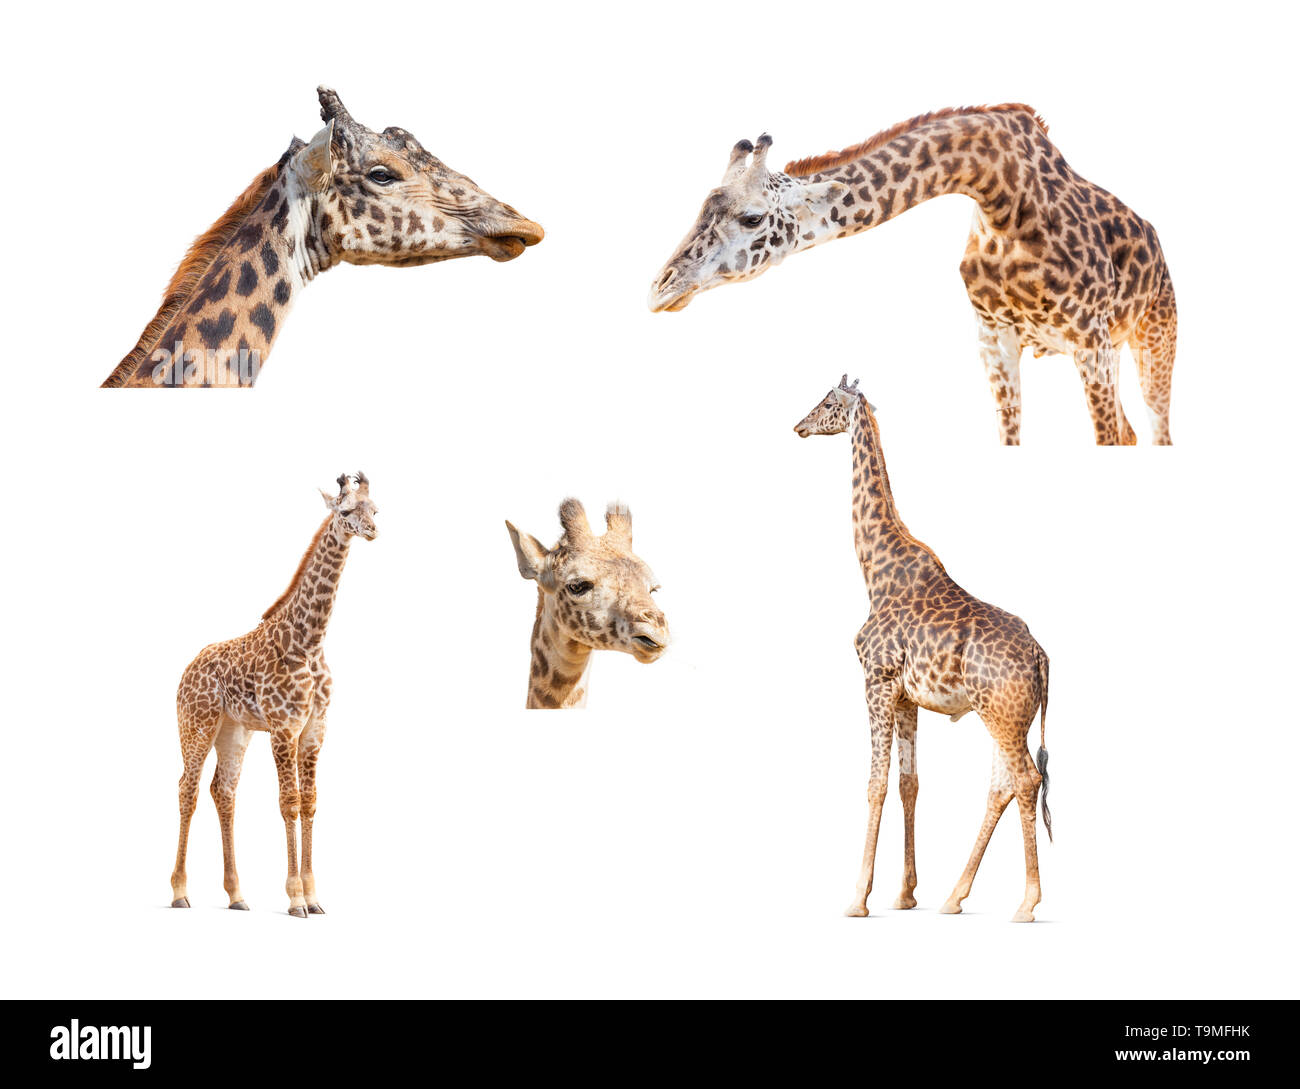 116+ Megapixel Giraffe Variety Collection Isolated on White Background Stock Photo